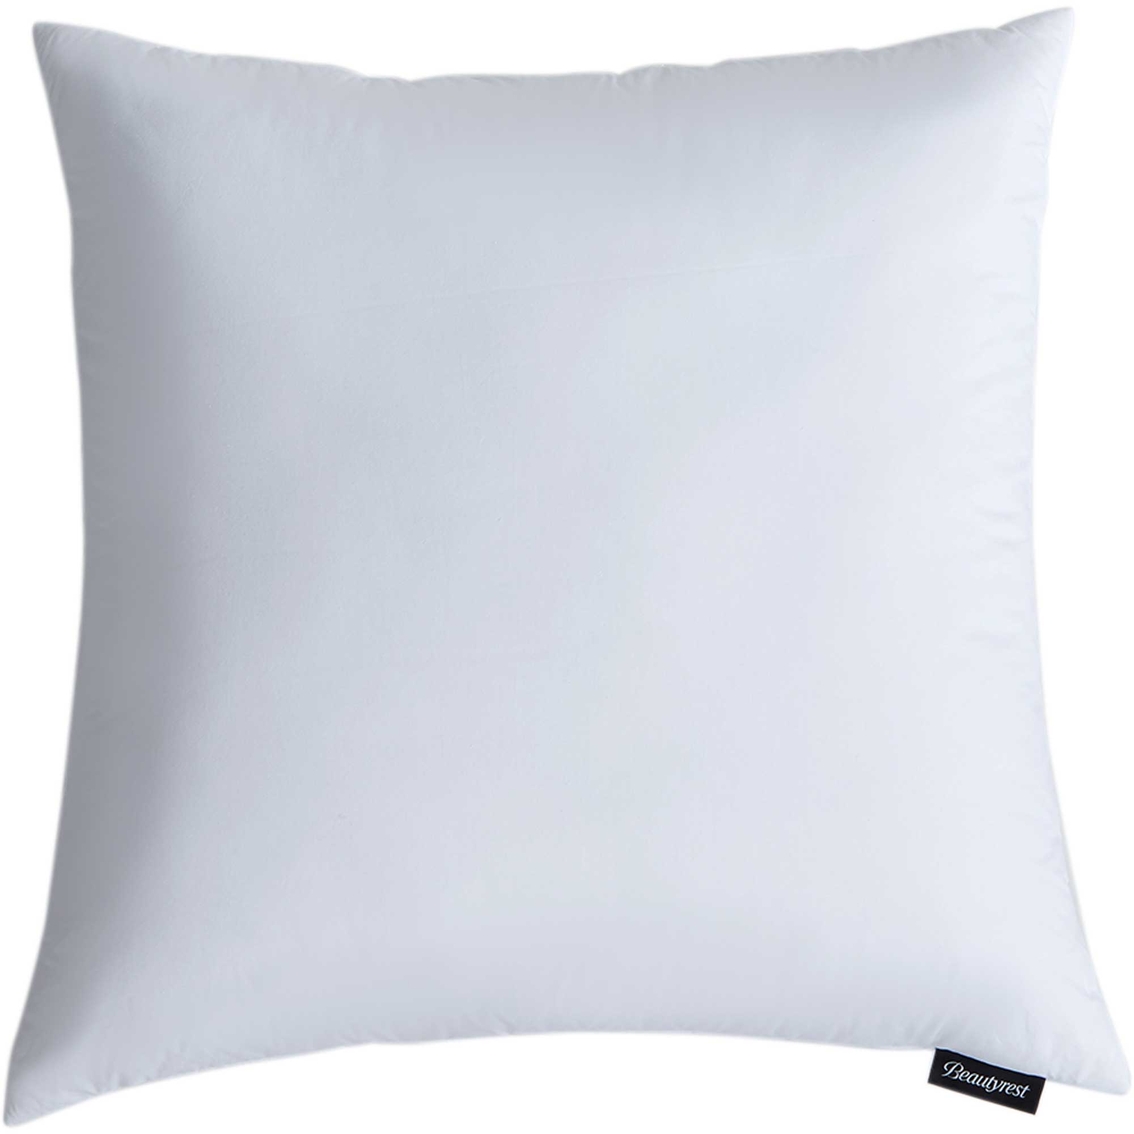 Beautyrest 233tc Cotton Softy Around 95/5 Feather/Down Firm Euro Pillow 2 pk. - Image 4 of 4